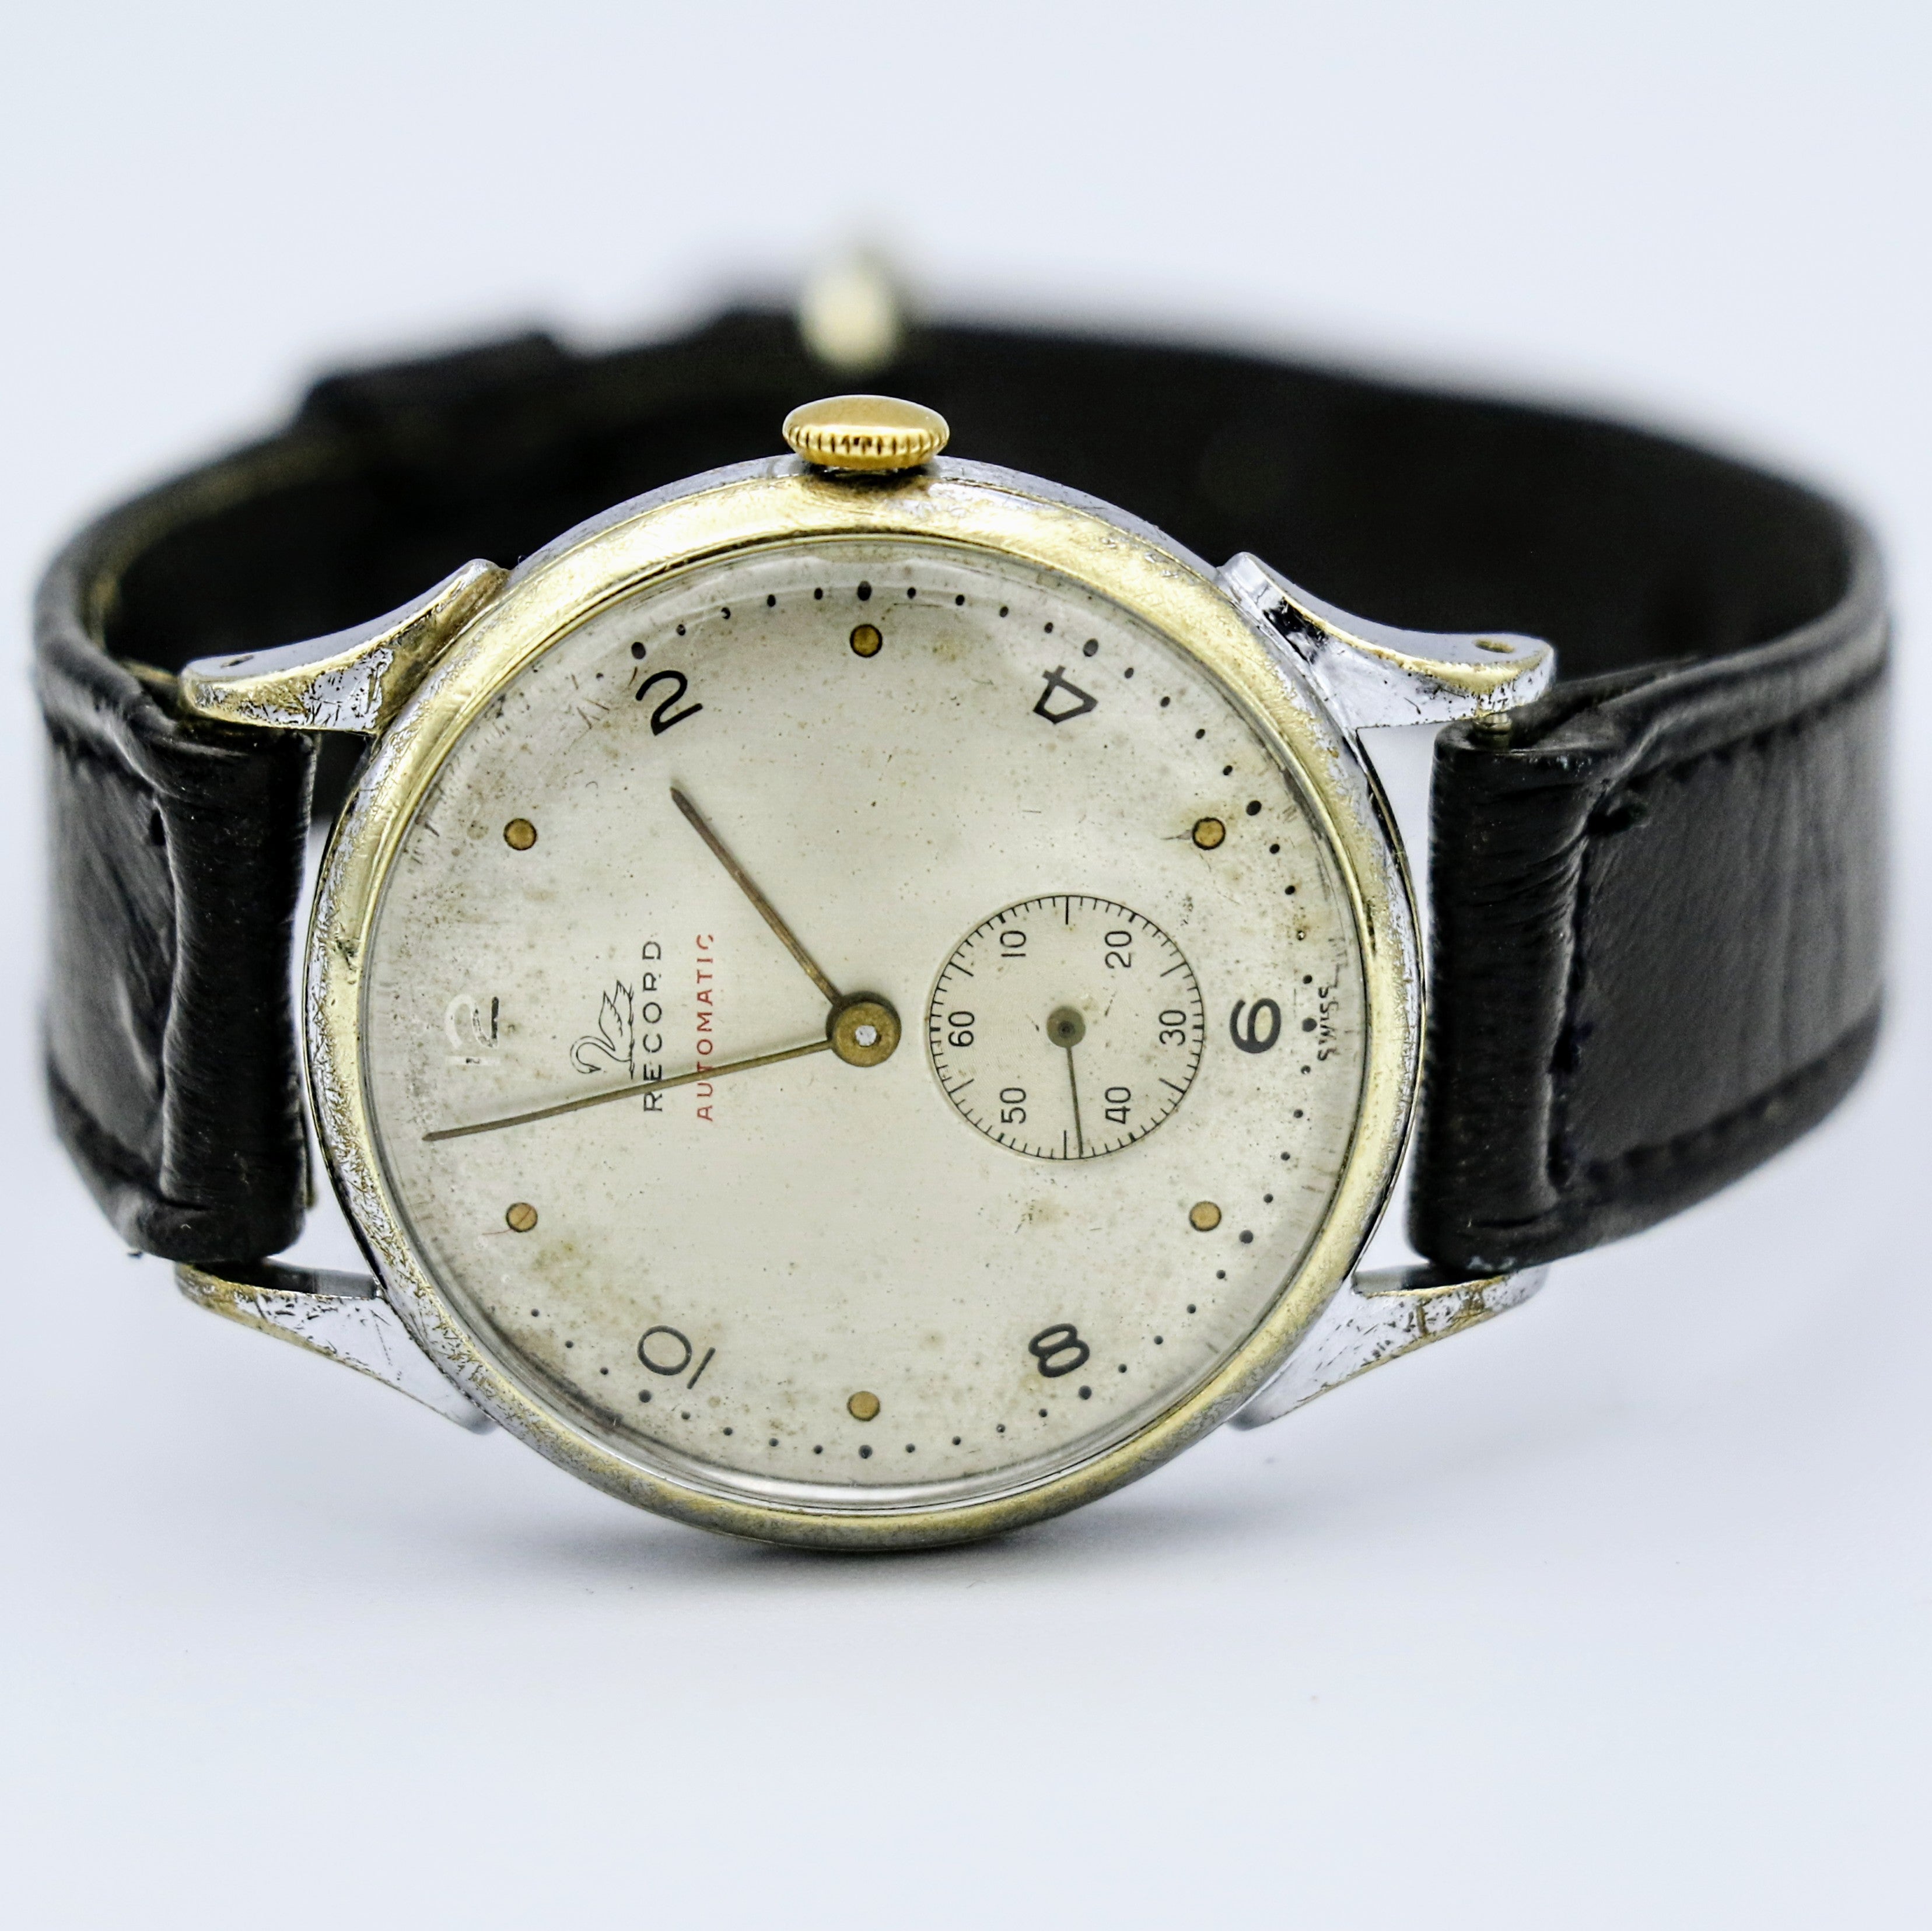 1940s RECORD Bumper Automatic Wristwatch Swiss Made Cal. 171 20 Jewels Watch